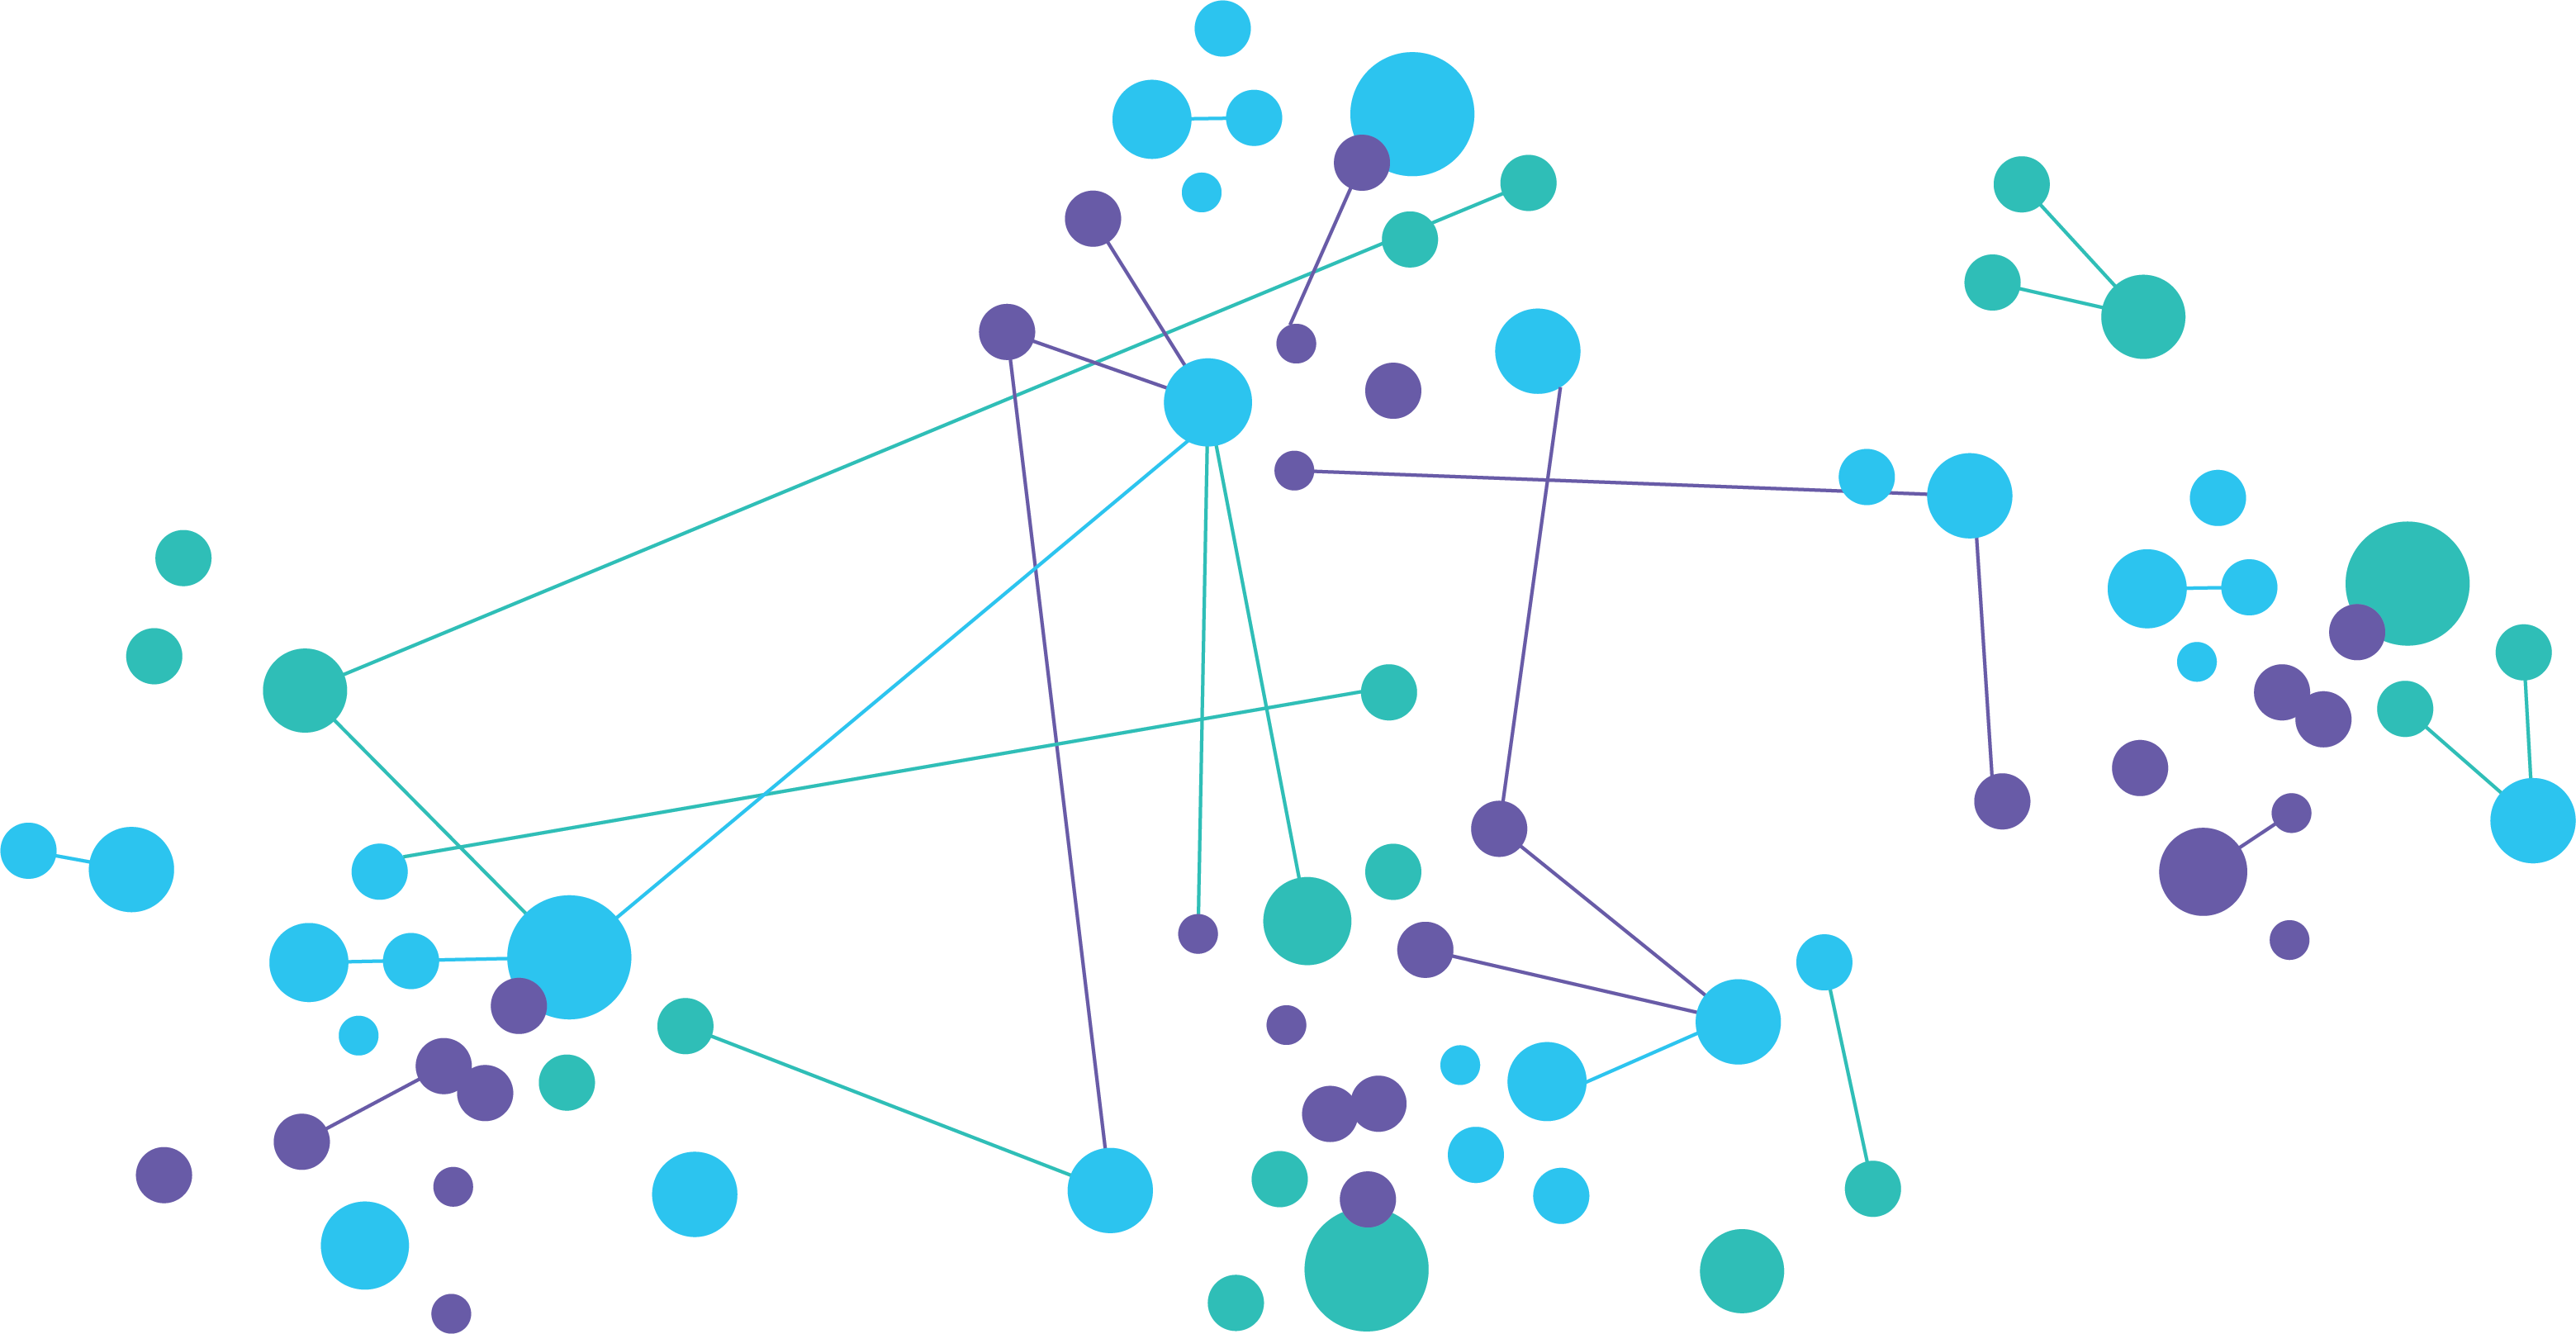 Relations, network